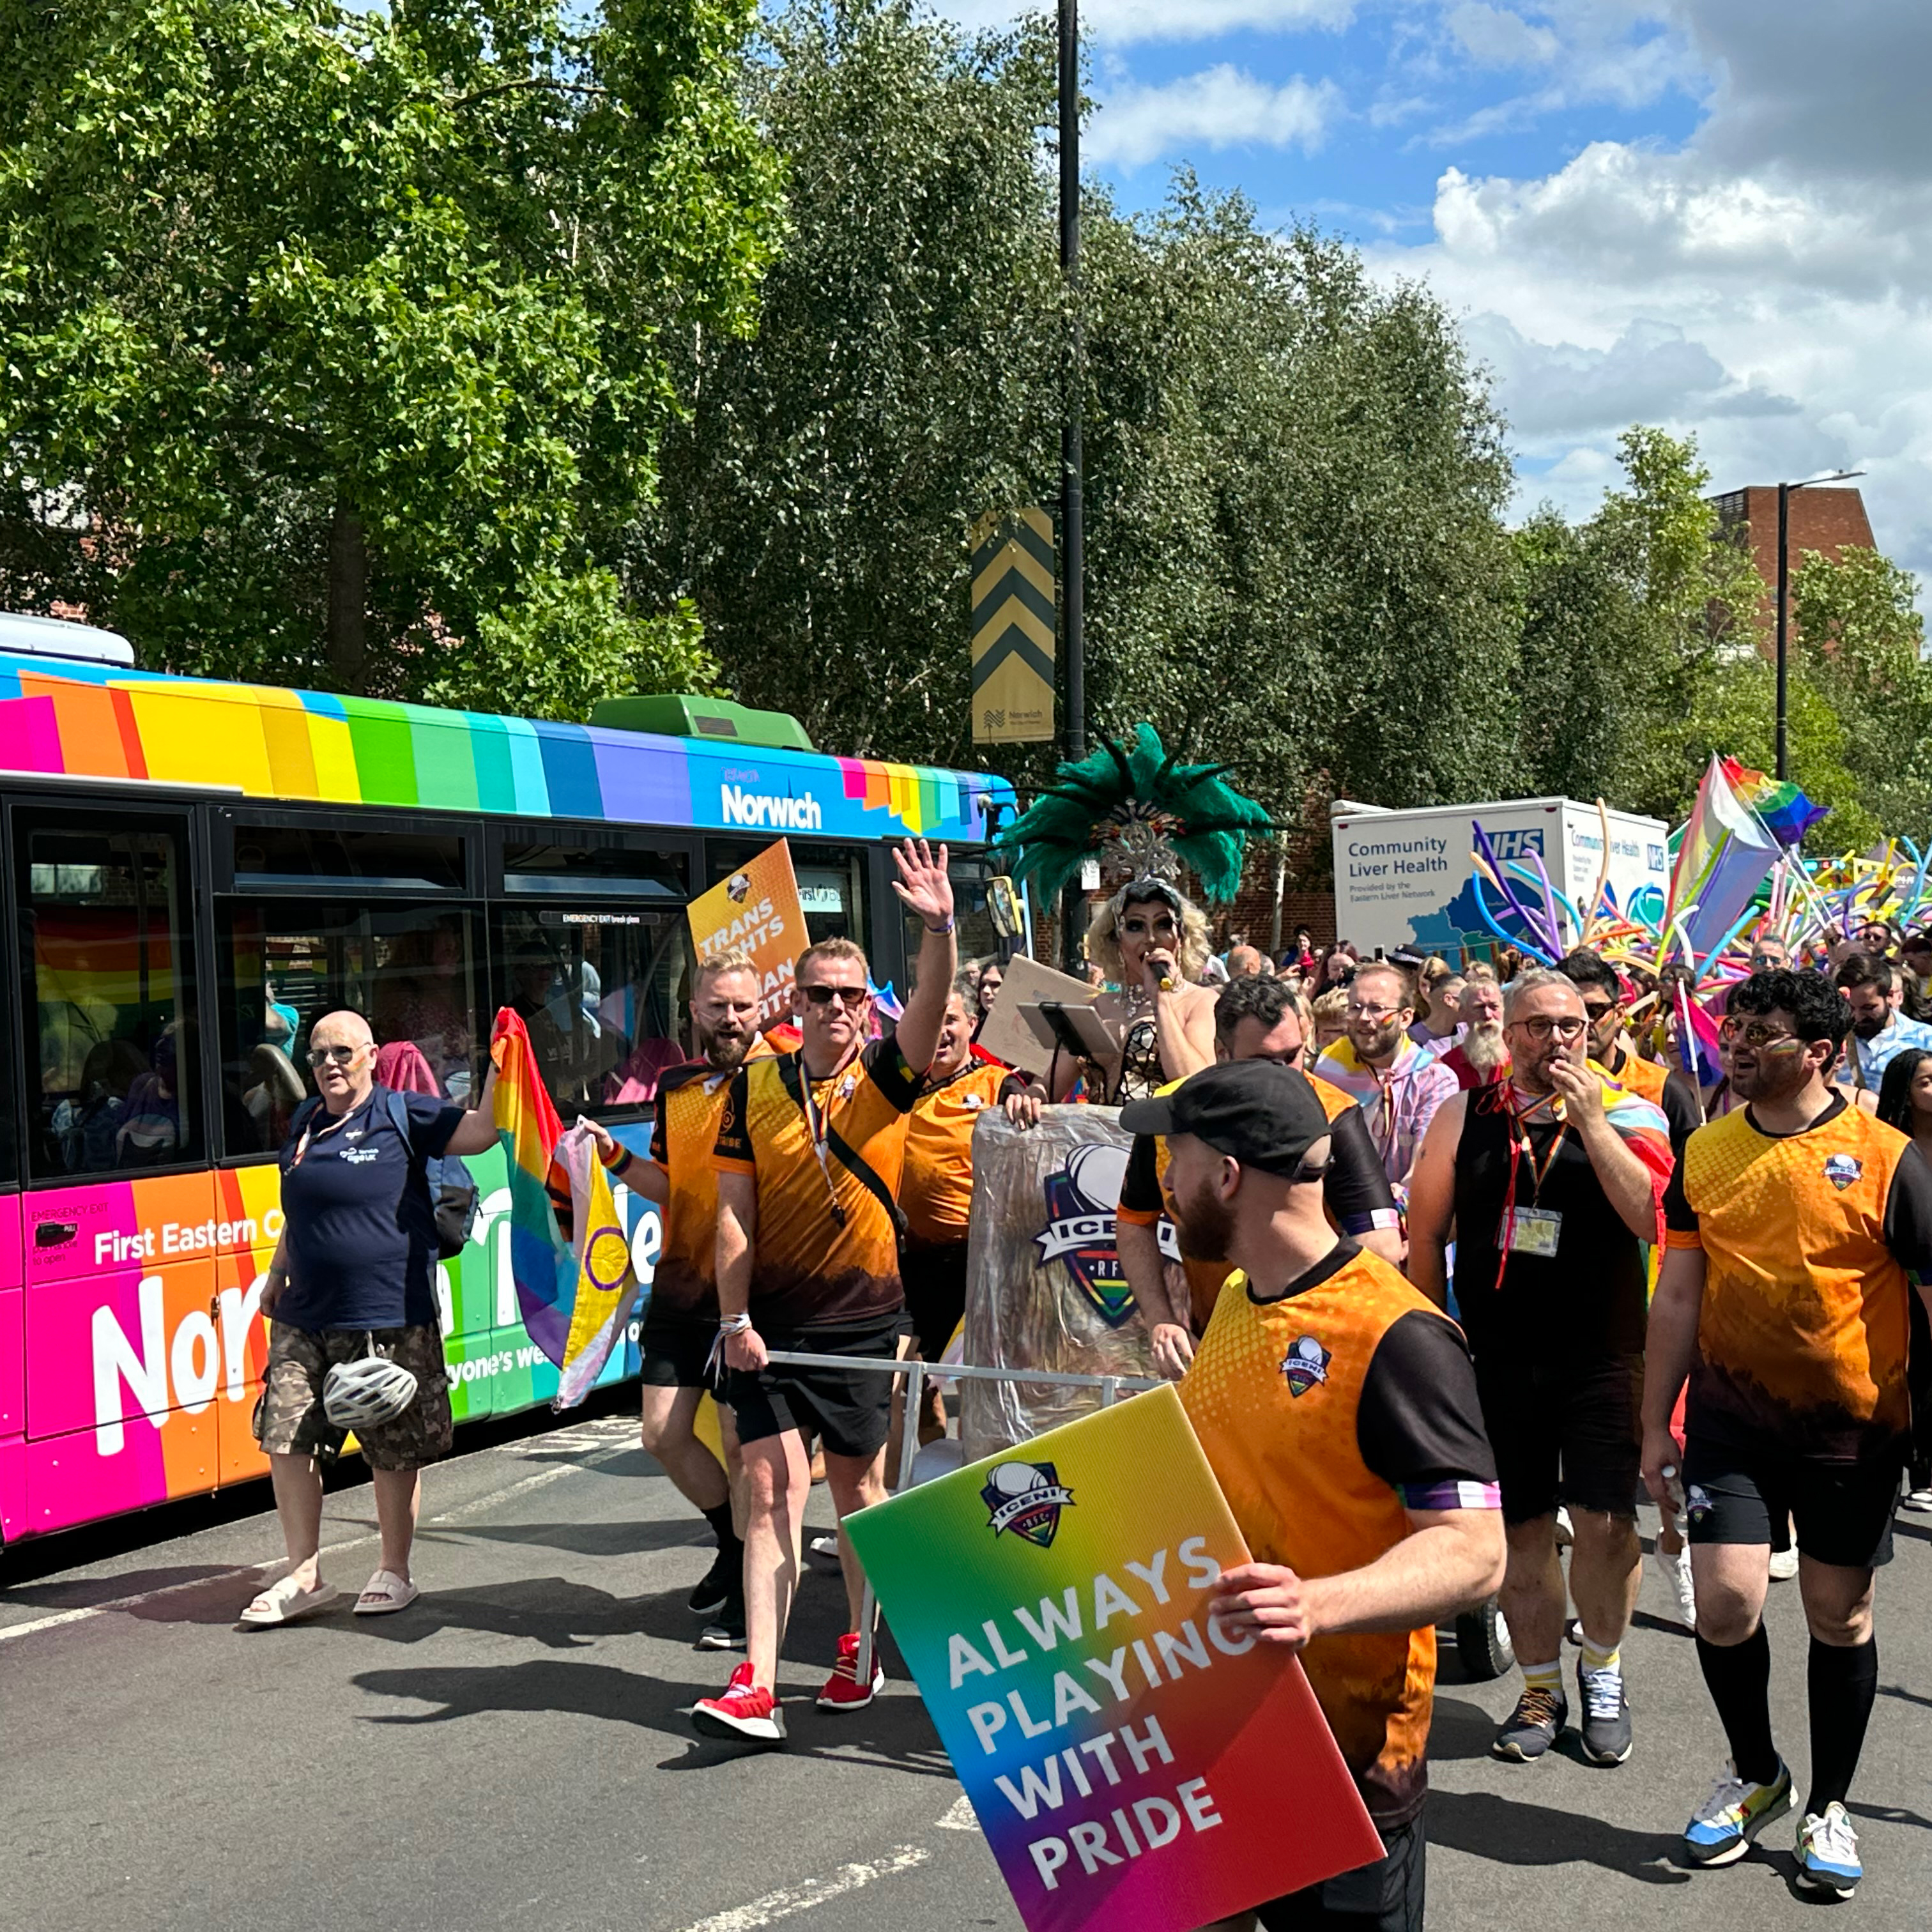 The pride march passing the pride bus at the Norwich Pride event.